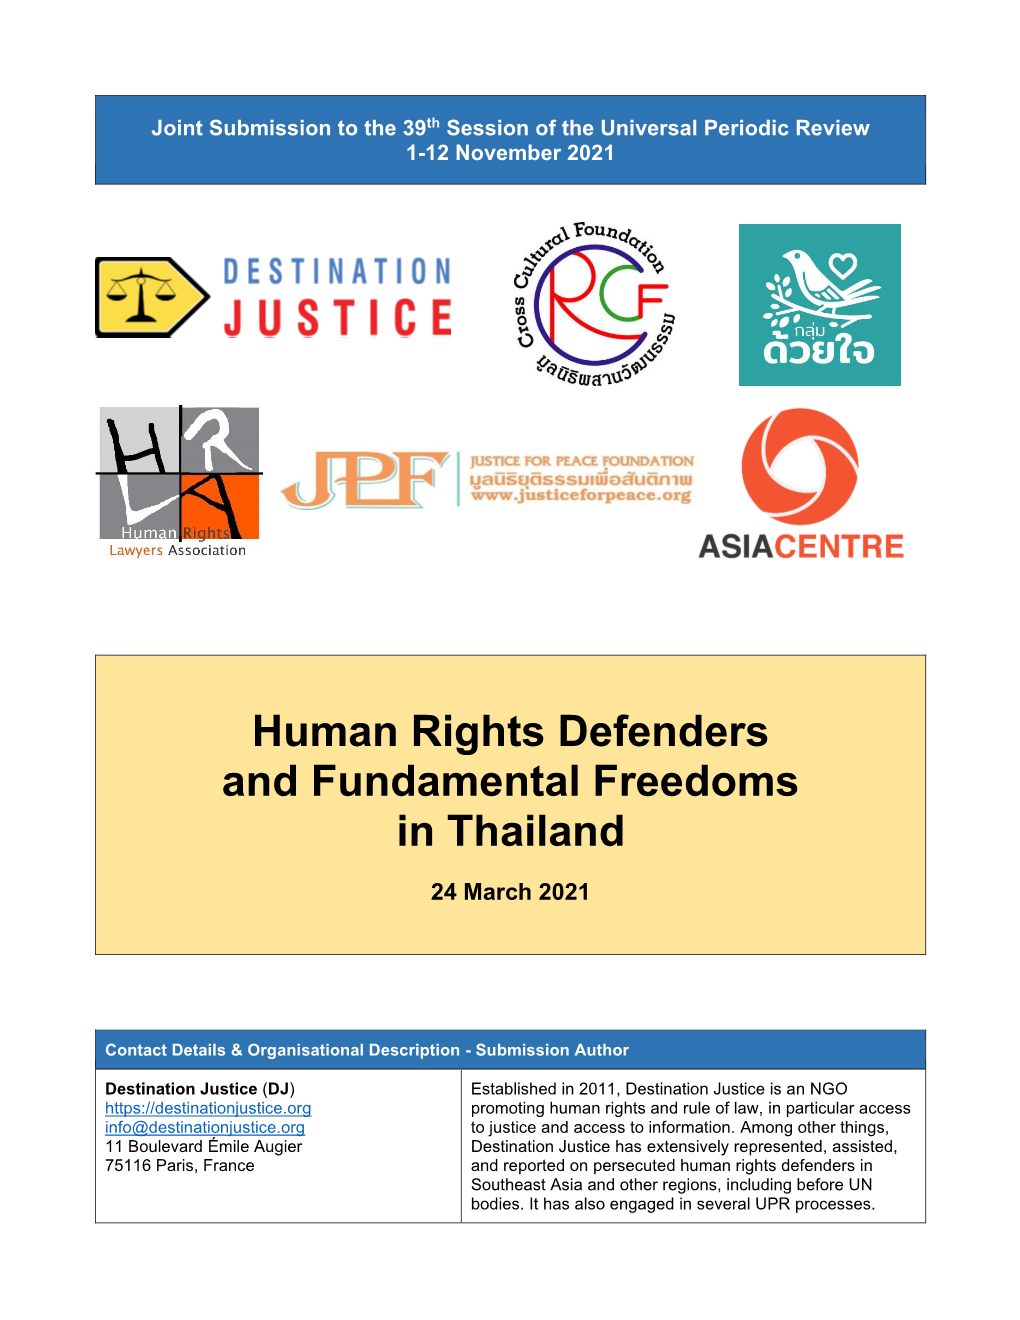 Human Rights Defenders and Fundamental Freedoms in Thailand